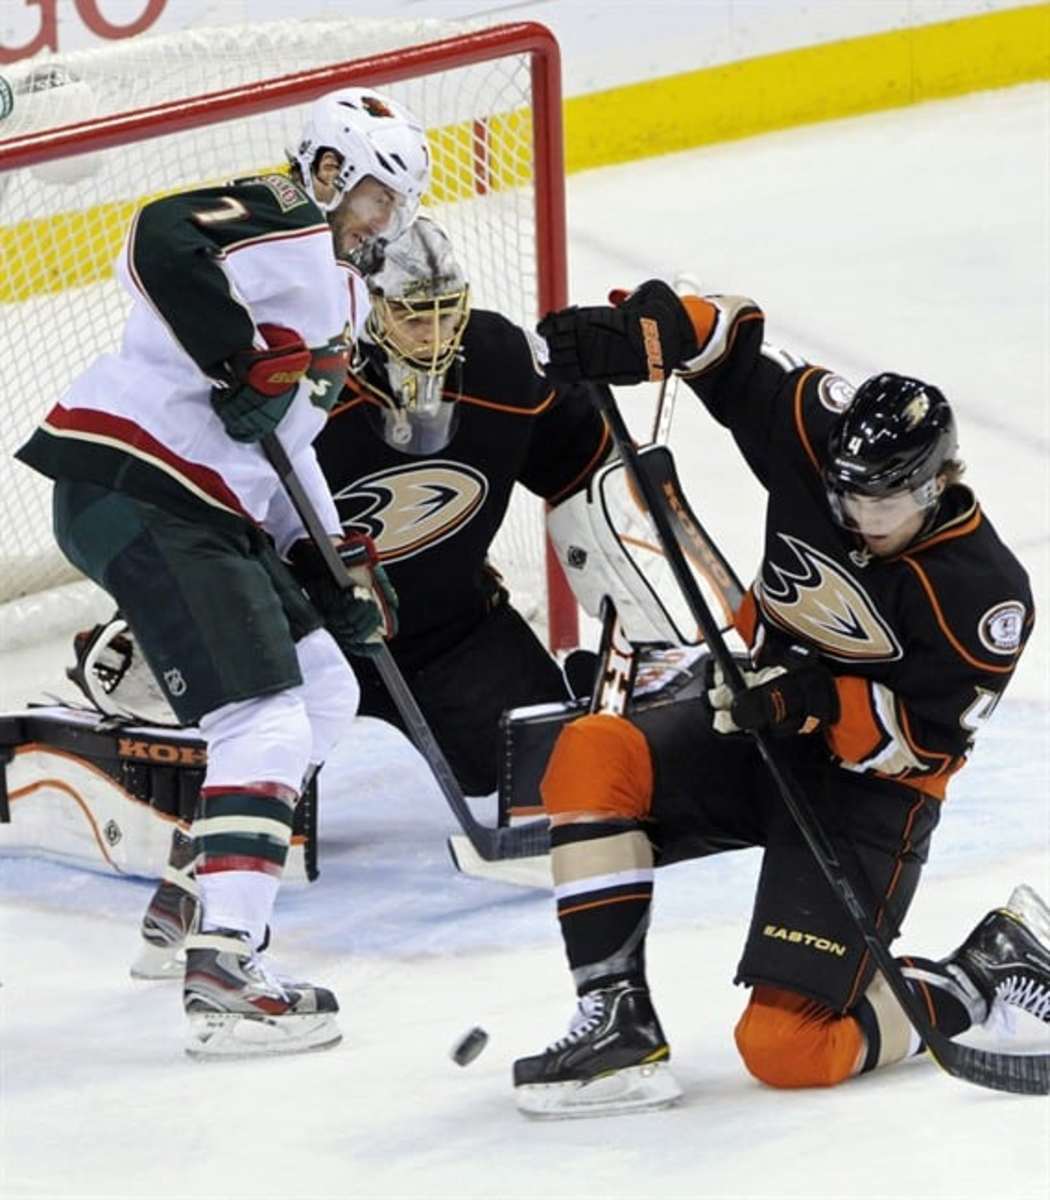 As goals dwindle, Corey Perry finds success setting them up for Ducks  teammates – Pasadena Star News